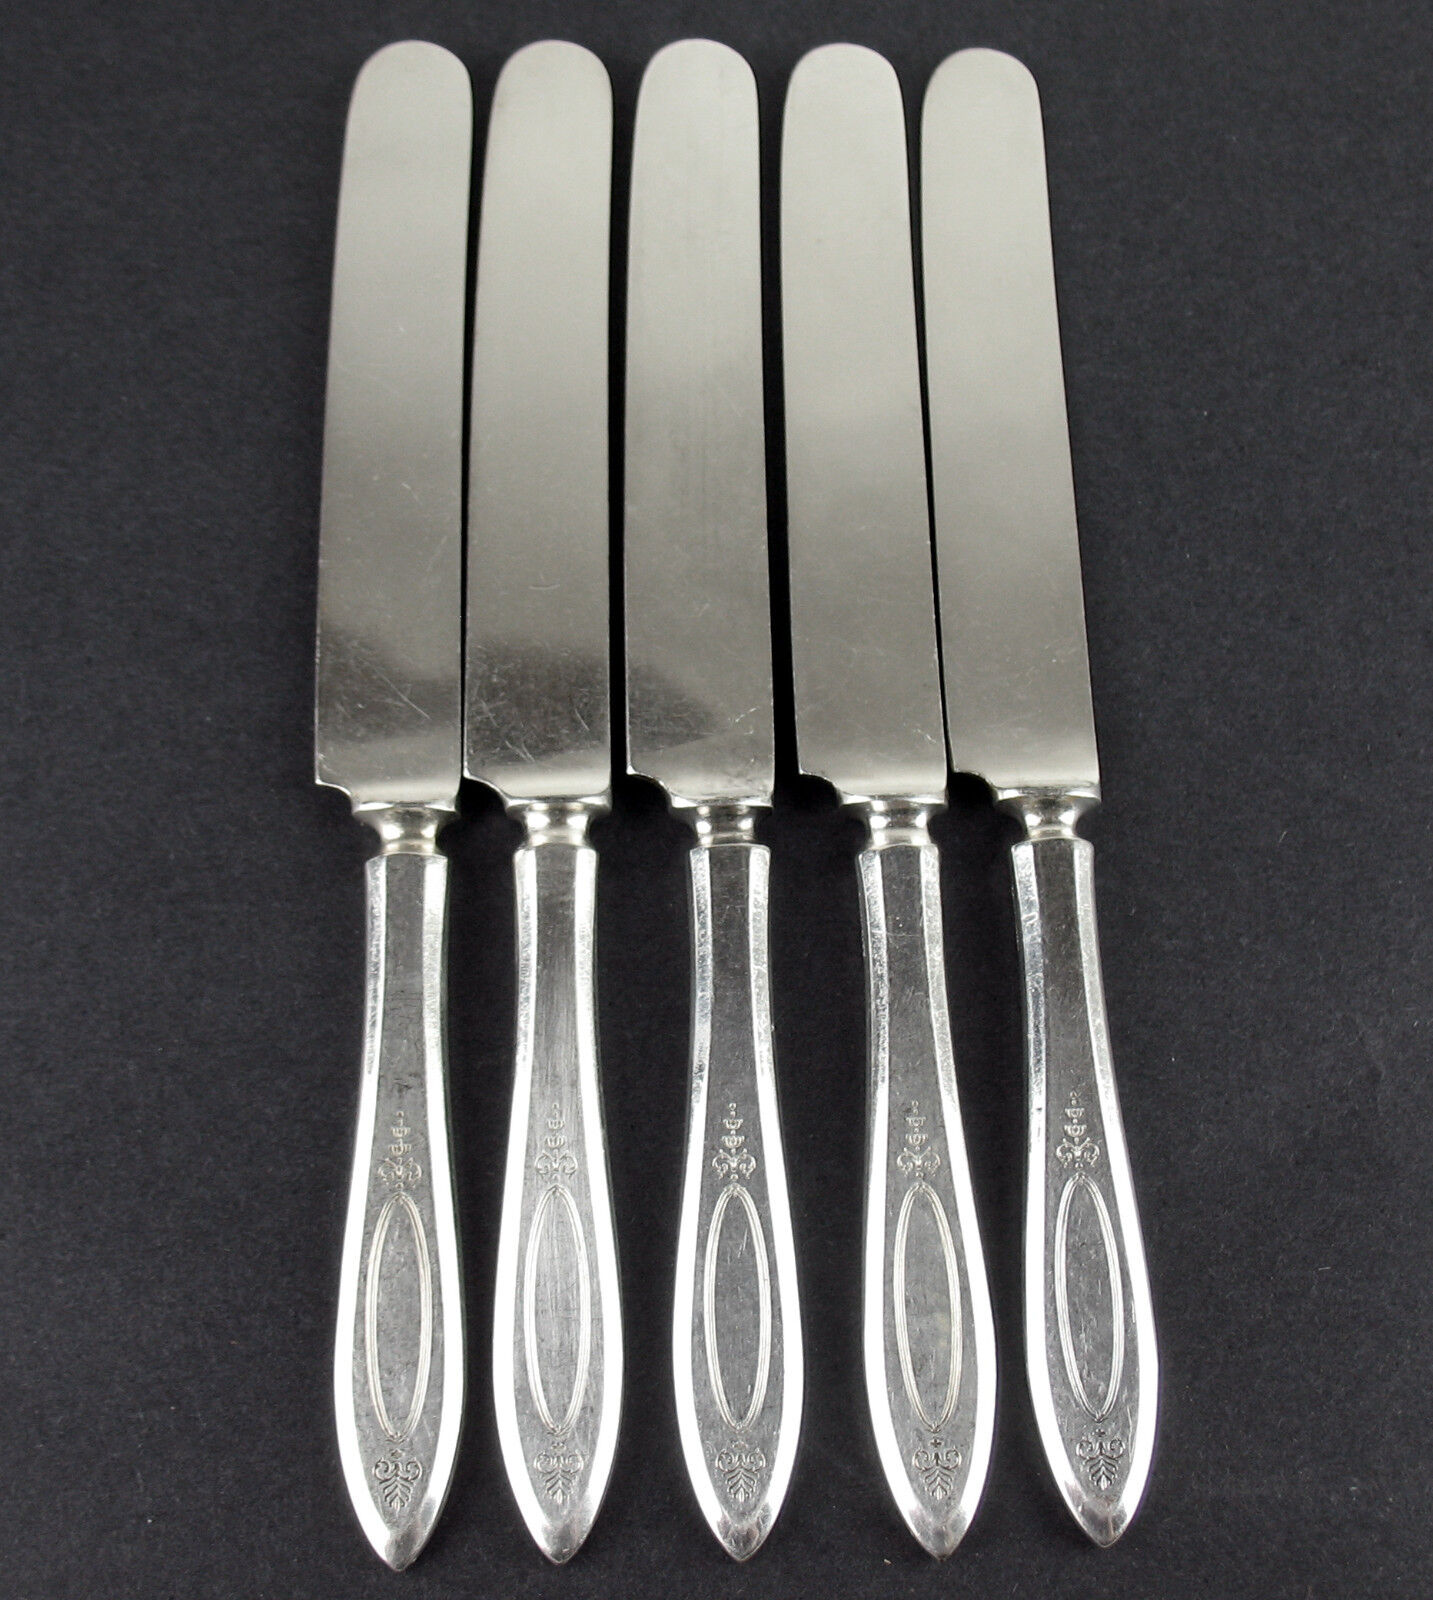 5 Free shipping anywhere in the nation Luncheon Knives Oneida Community 1917 Adam Miami Mall Silverp SolidHandle